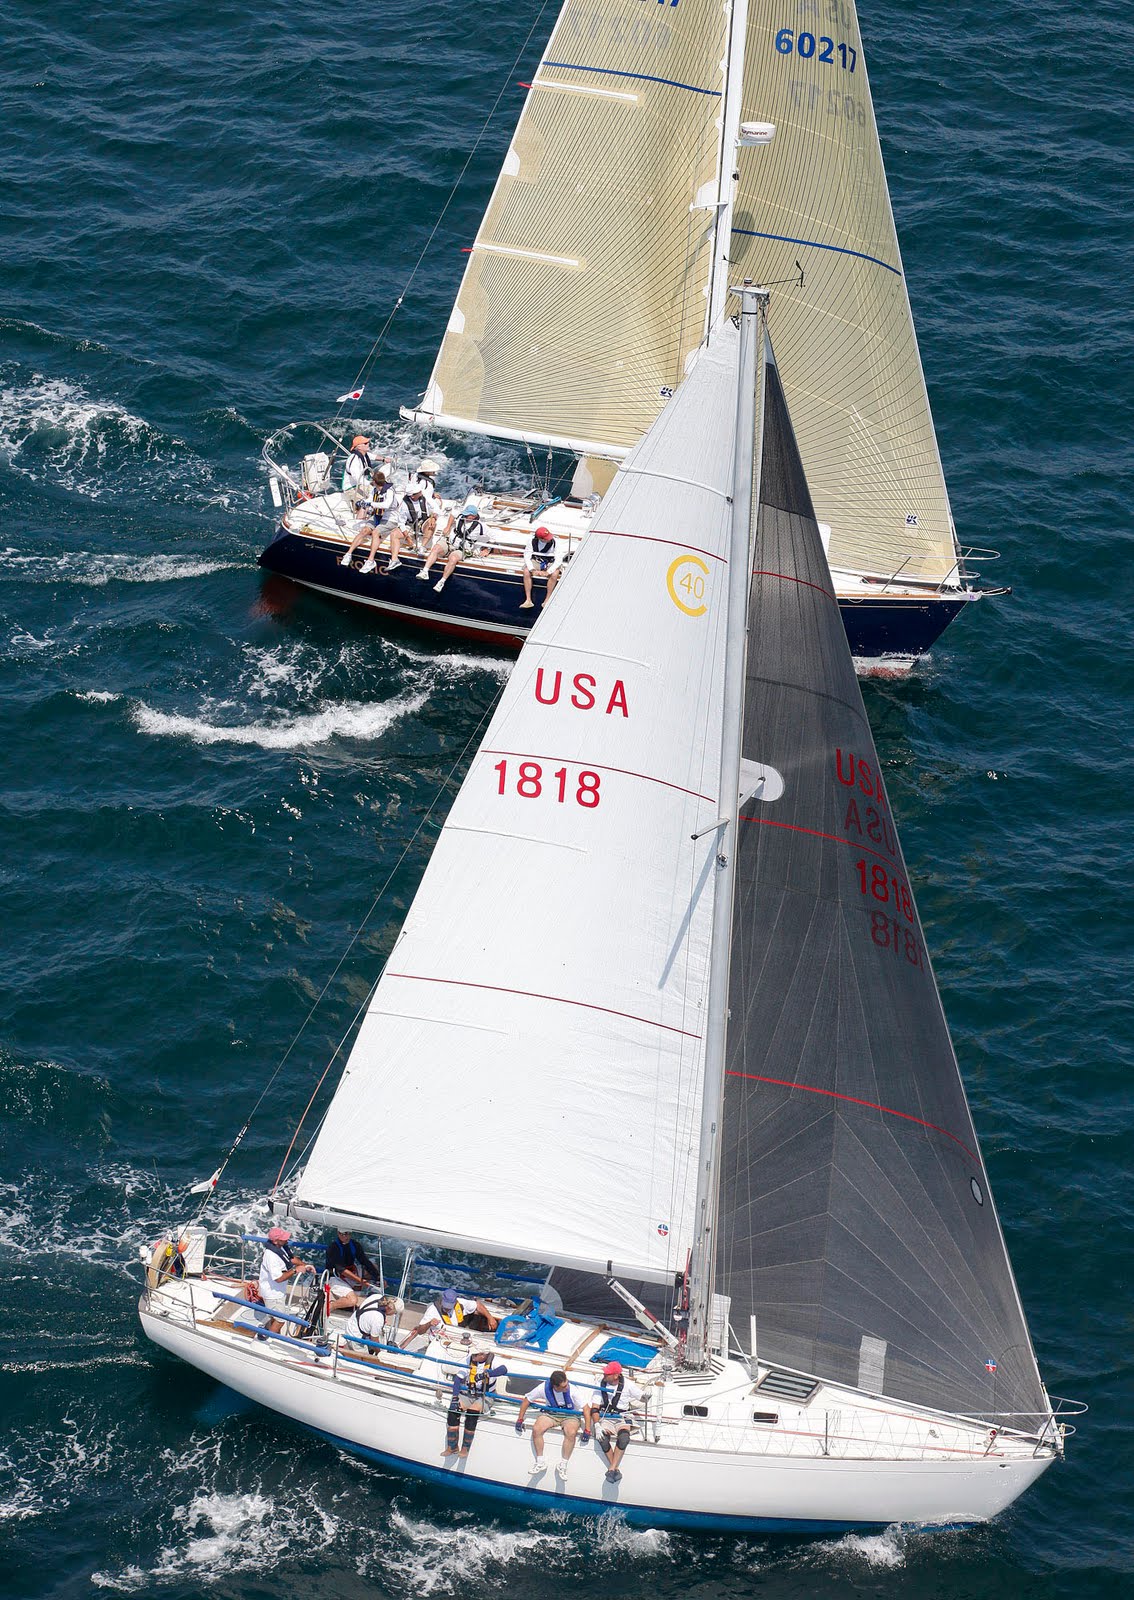 SailRaceWin NewportBermuda Race 'Speedboat' leads with 175 miles to go